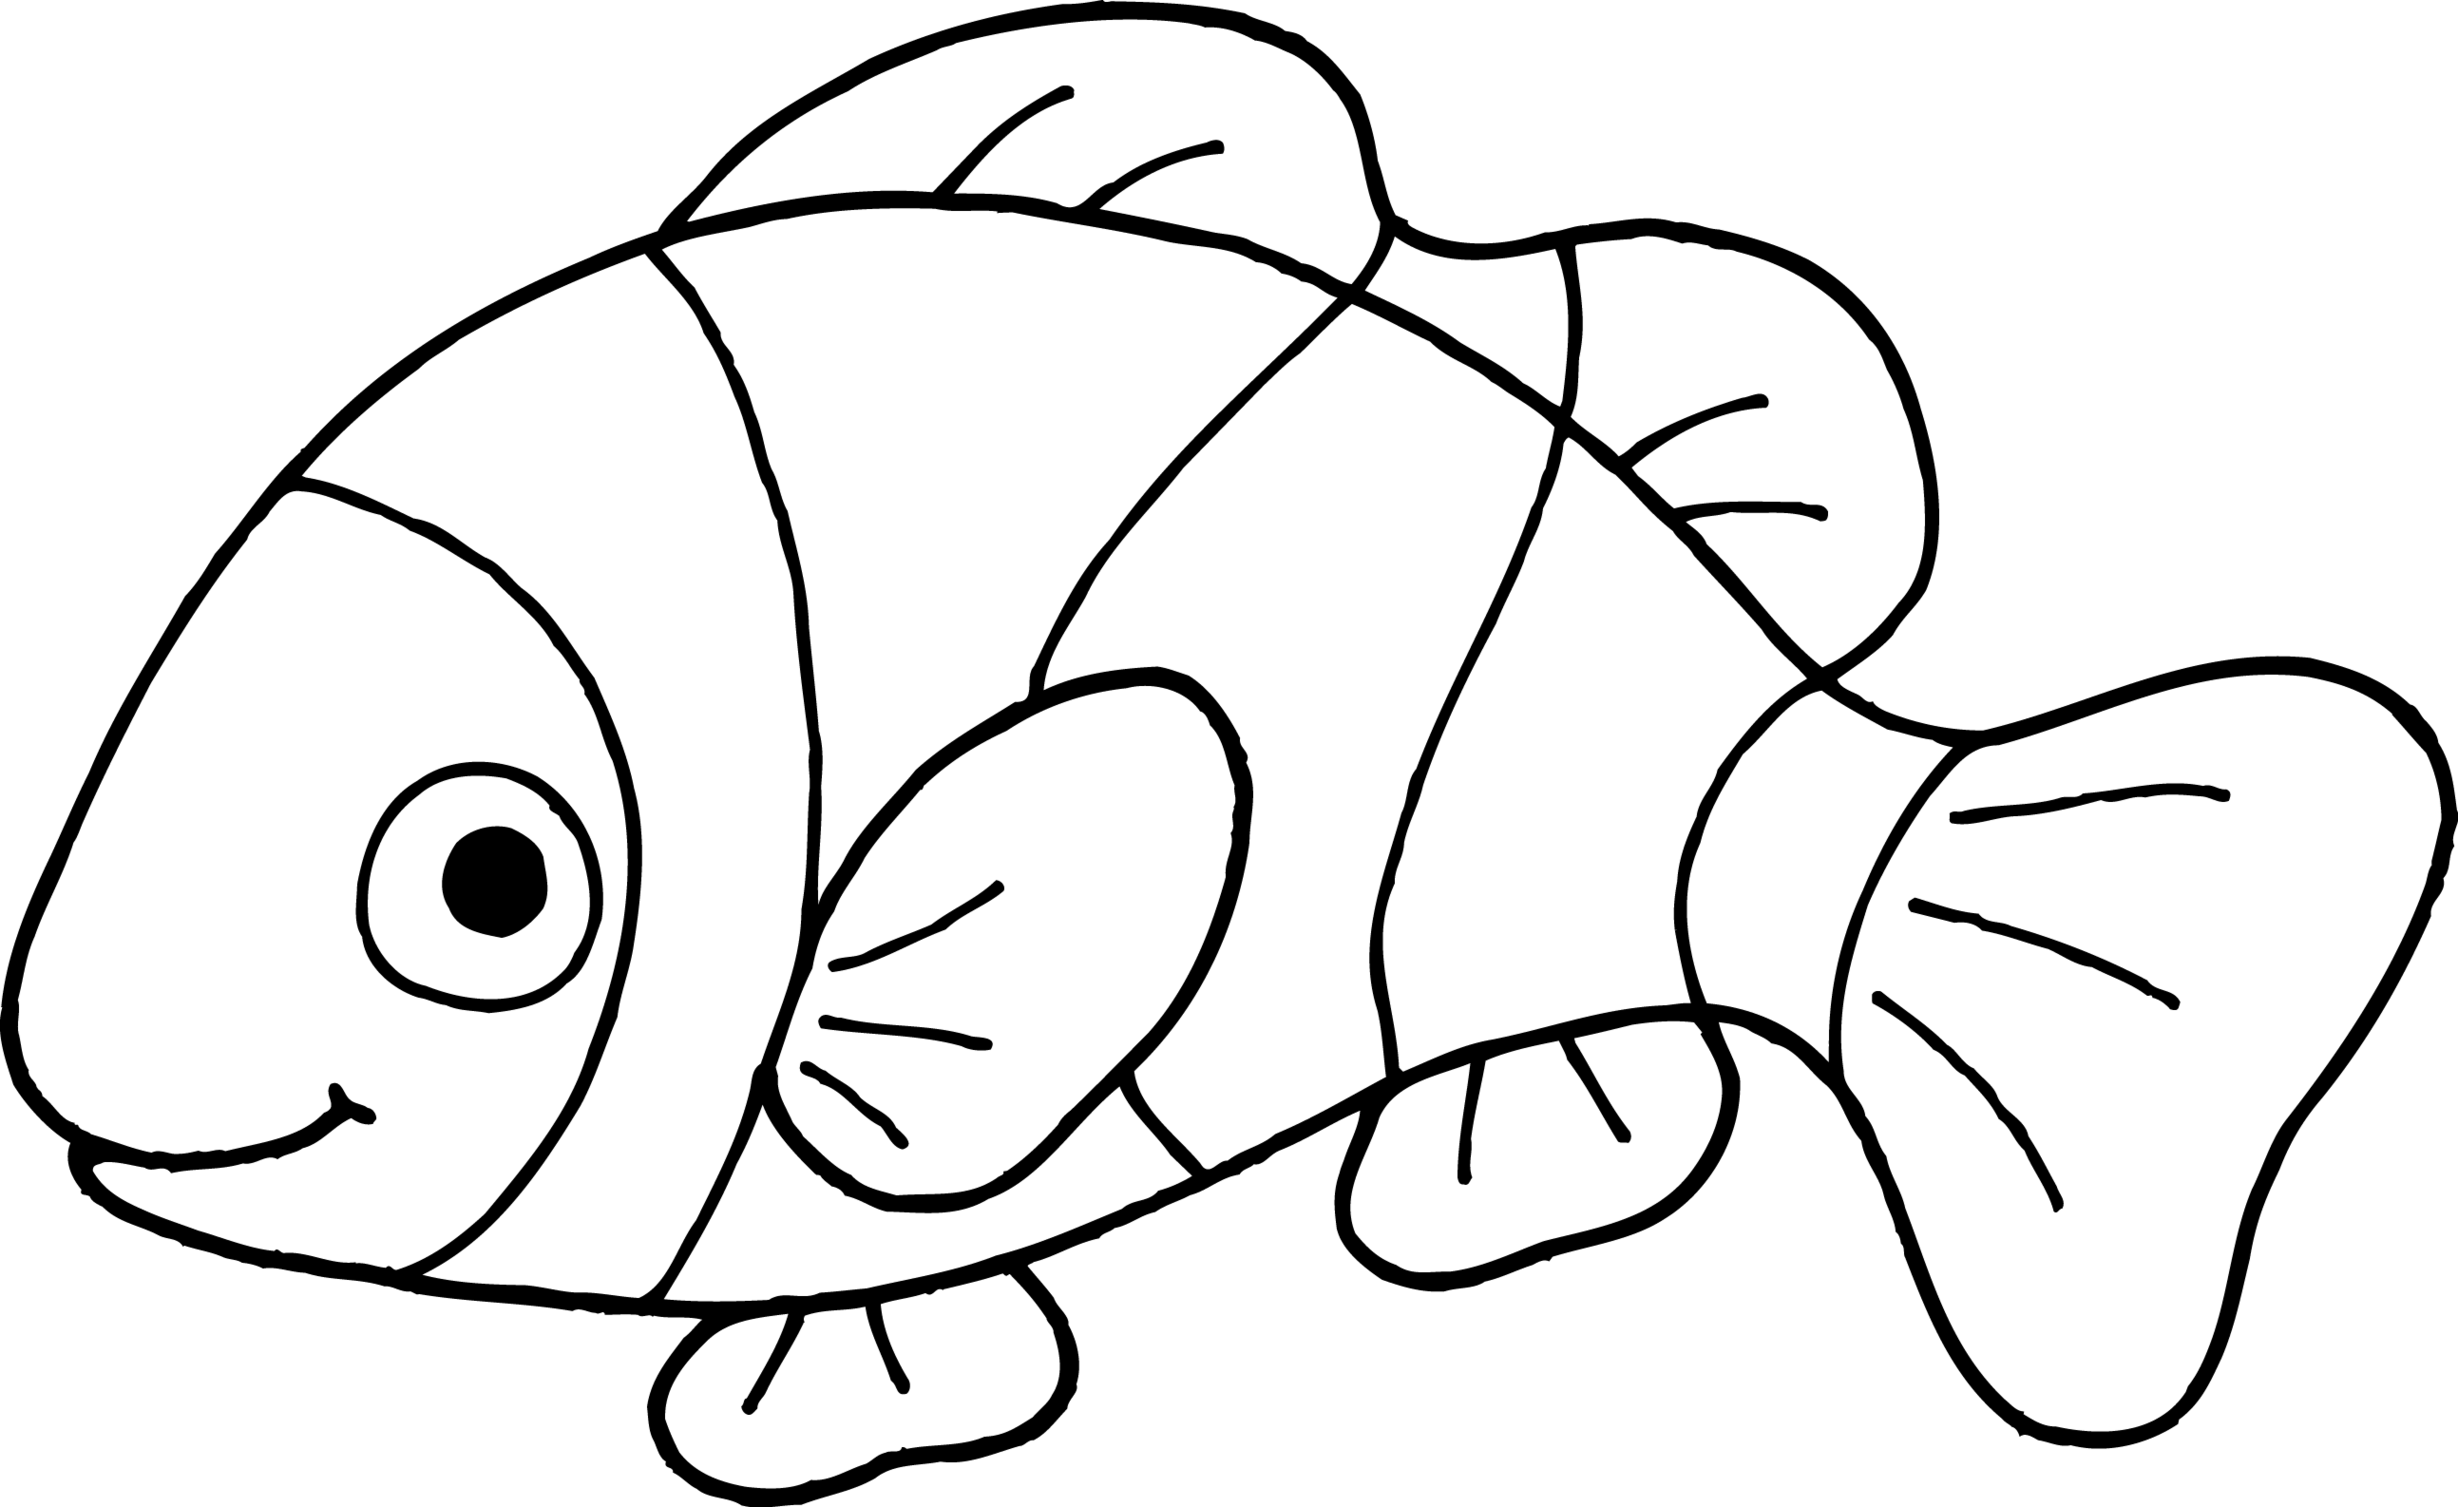 Clownfish clown fish outline clipart wikiclipart